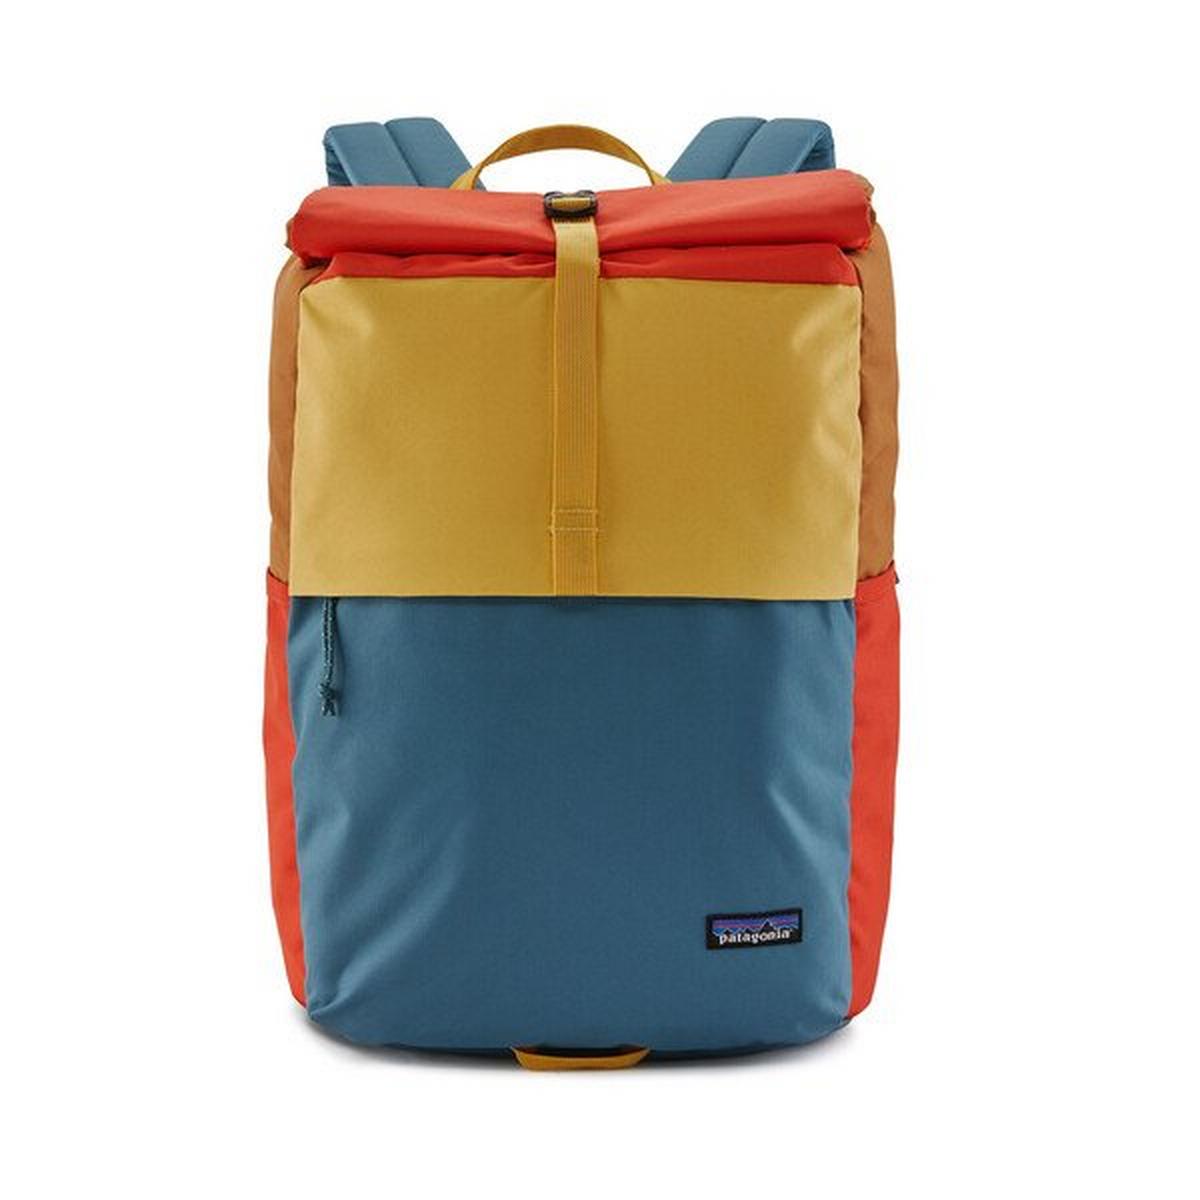 Patagonia Arbor Roll Top Pack - Patchwork Surfboard